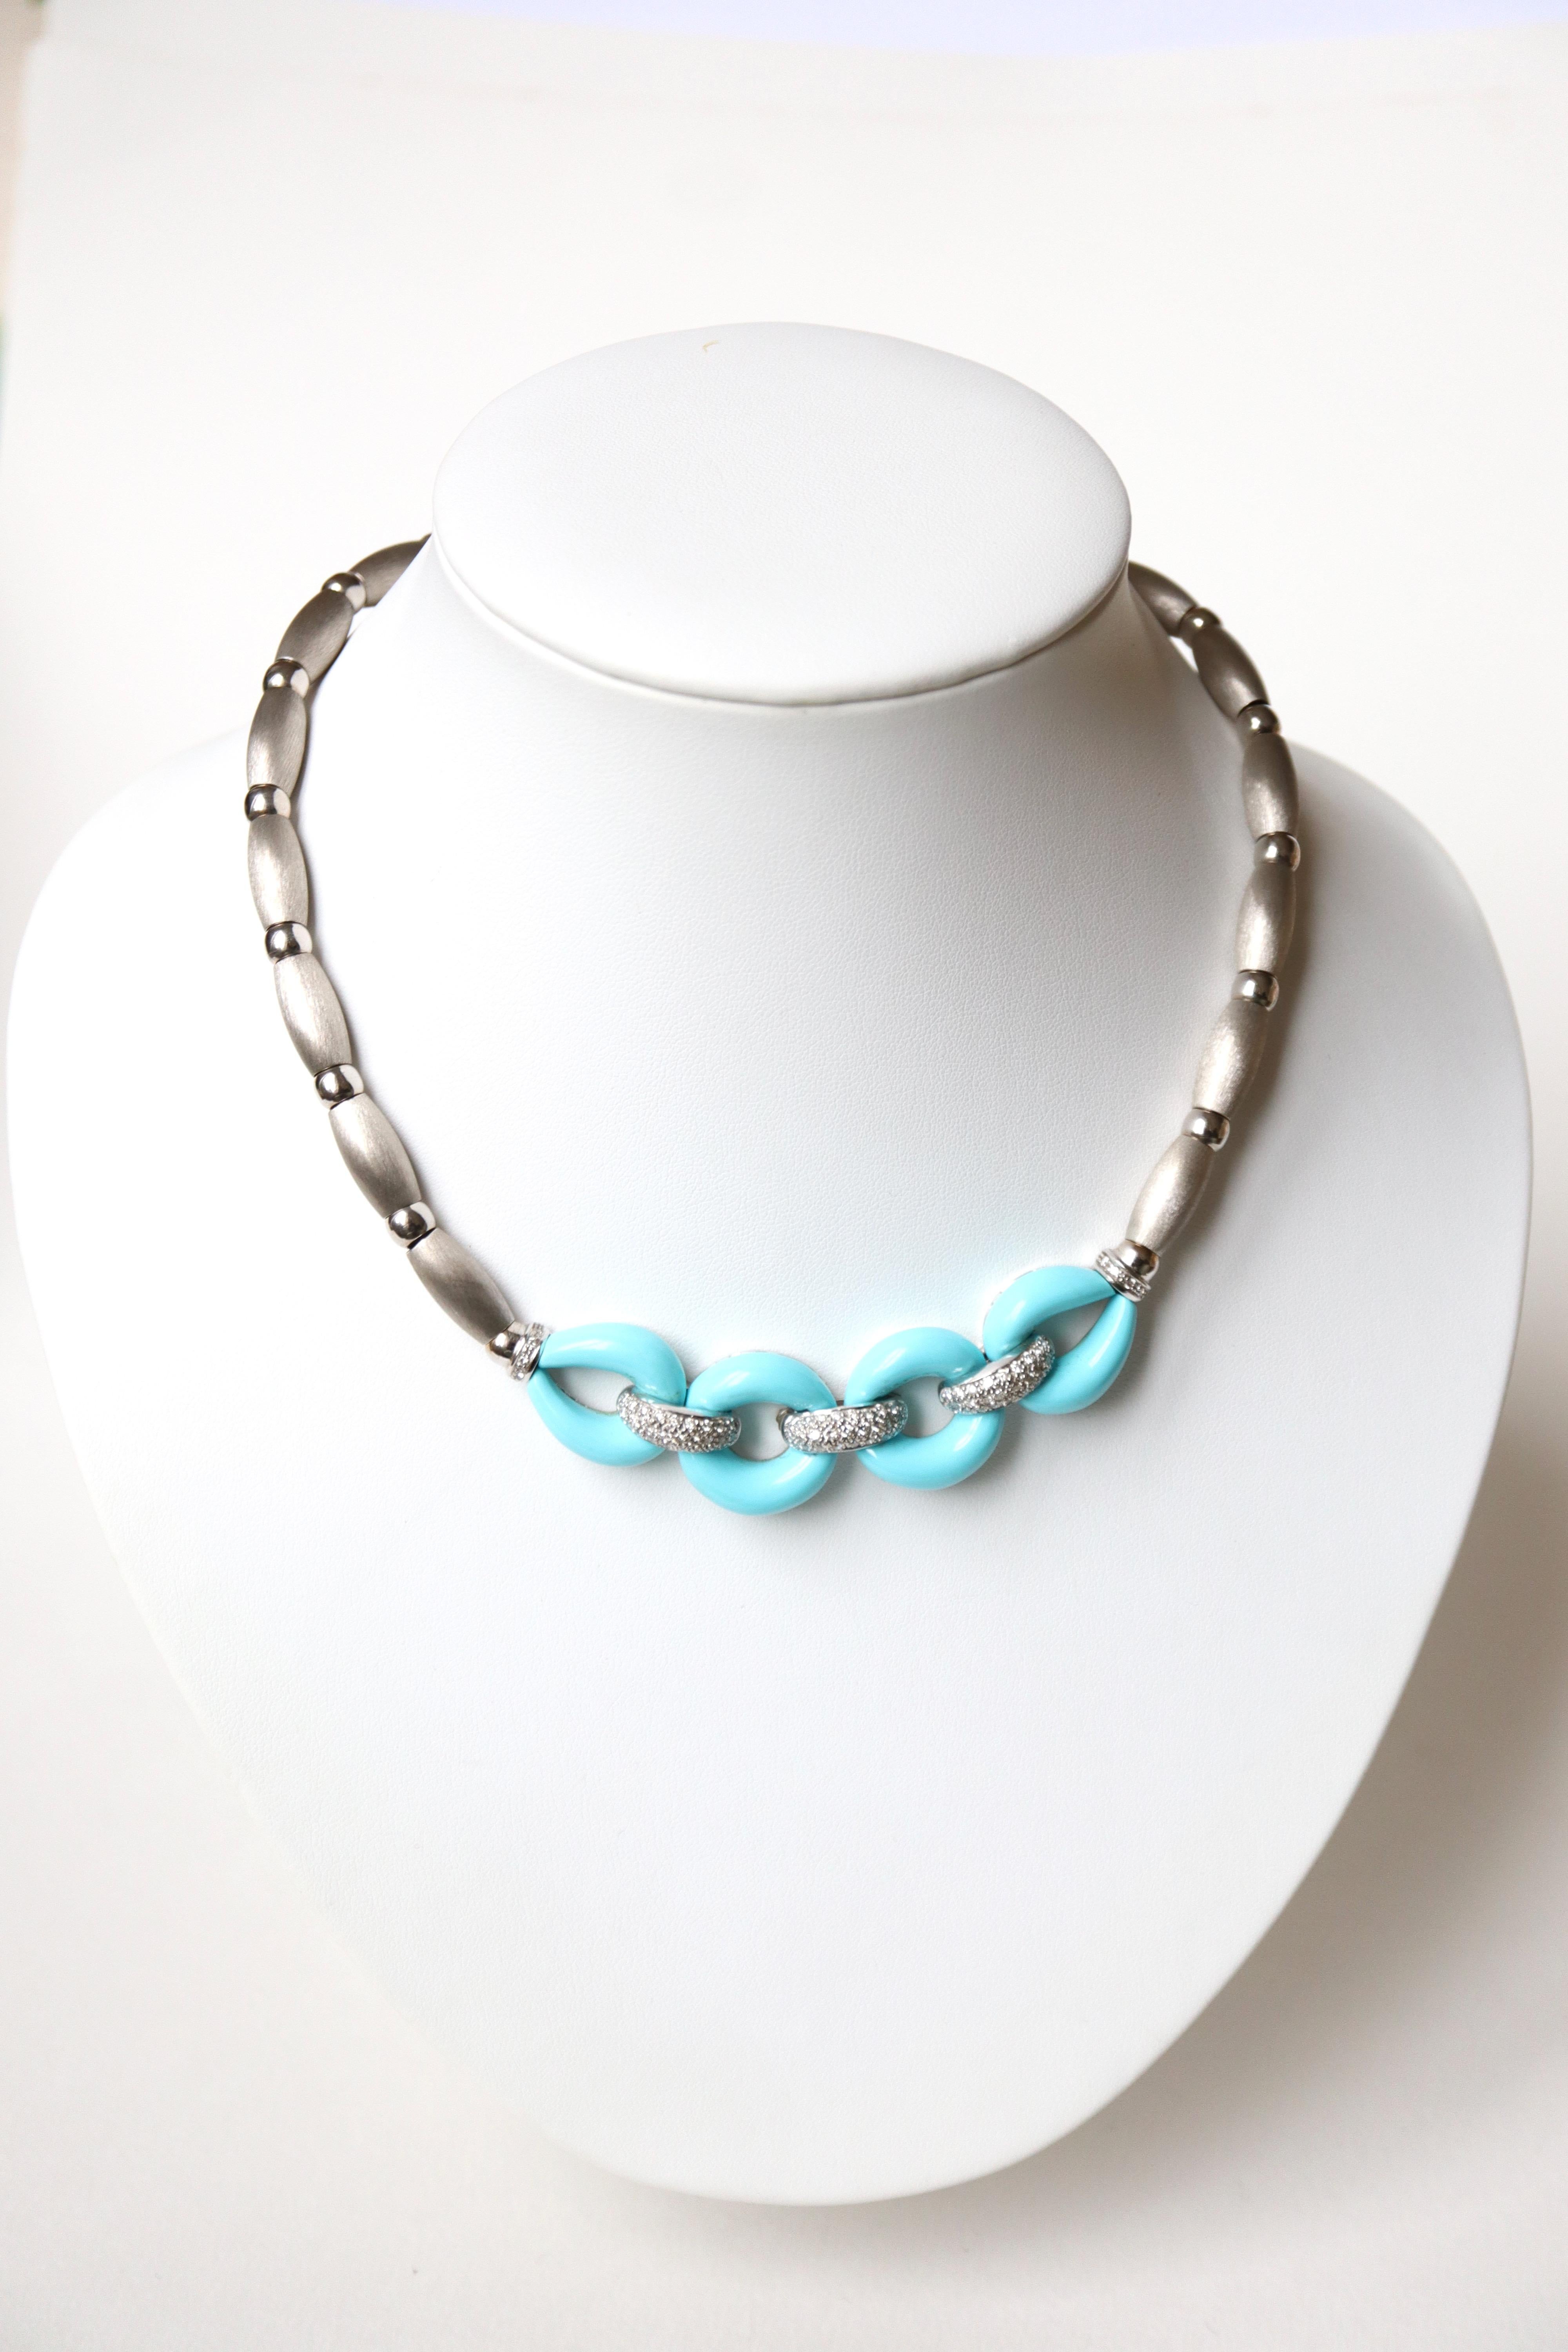 Turquoise and diamond brushed 18 kt white gold necklace. It is composed of an 18 kt white gold chain threading alternating balls of curved tubes in brushed white gold retaining in its center two circles and two oval patterns of turquoises held